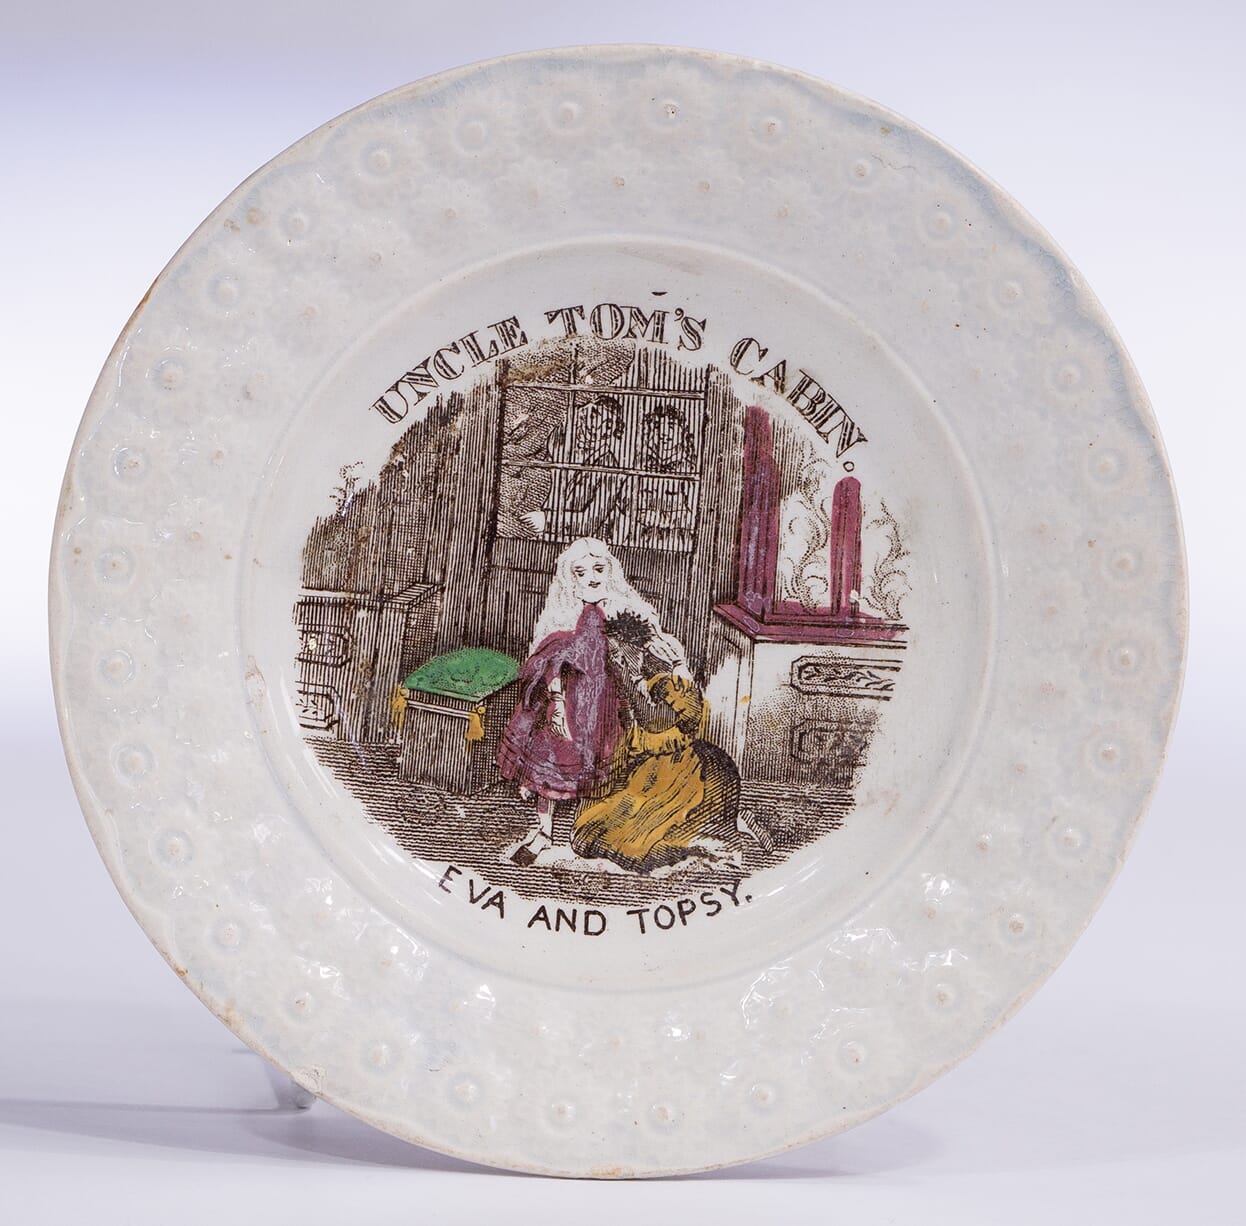 Child's plate - UNCLE TOM'S CABIN - EVA AND TOPSY - C. 1840 -0